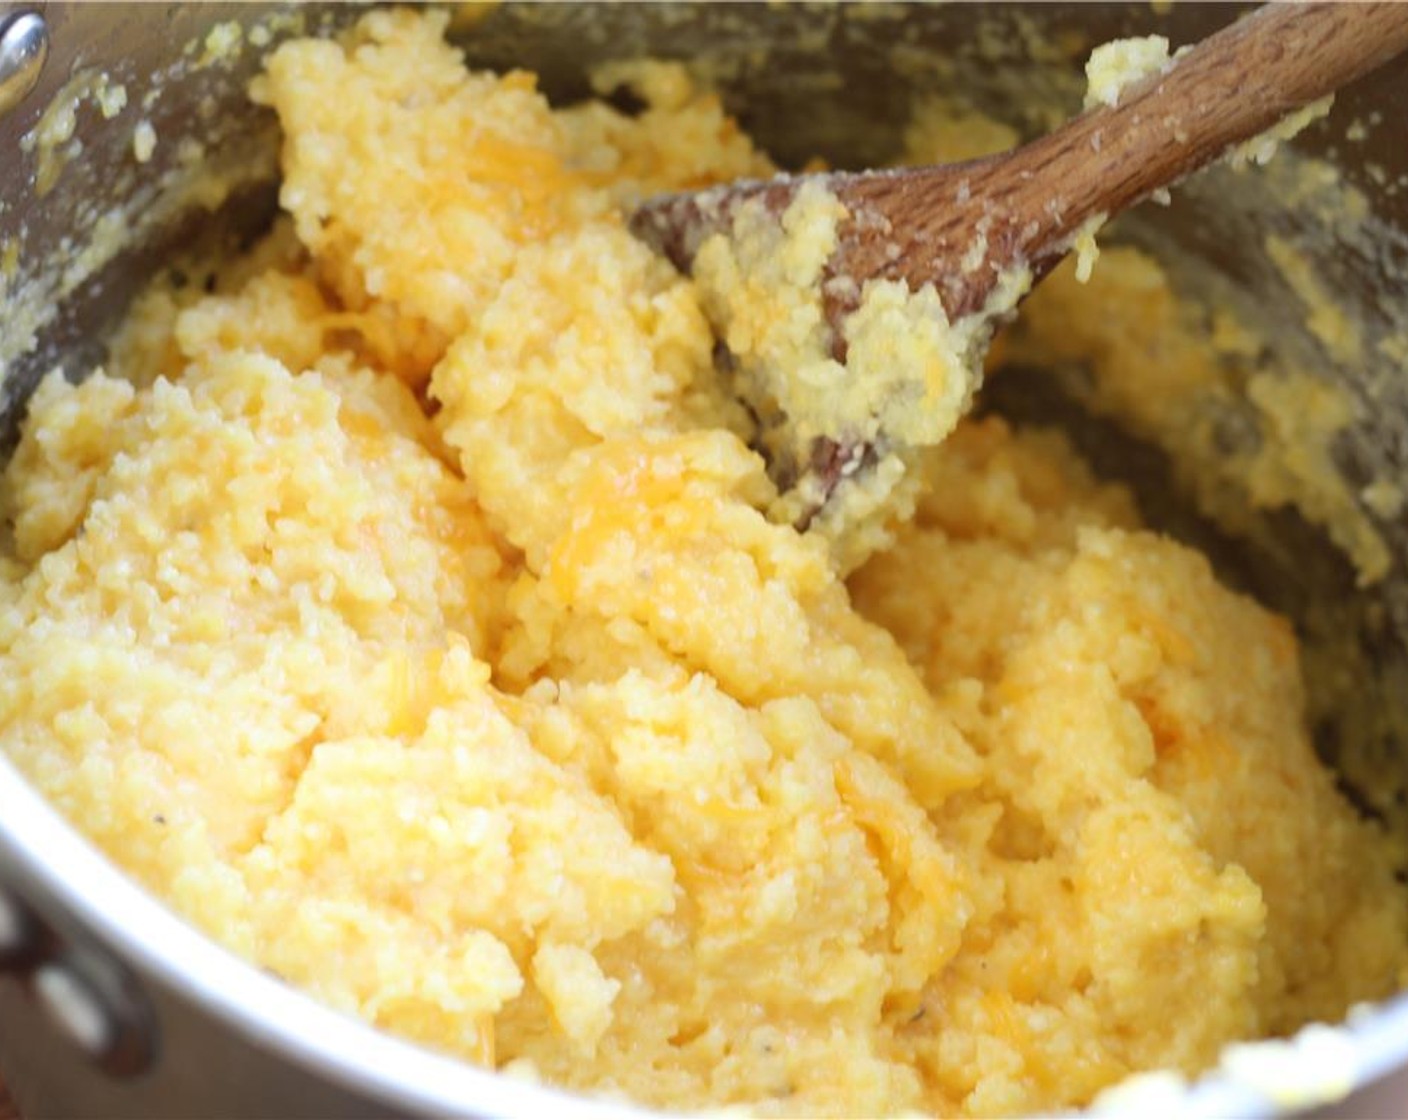 step 10 When the polenta is very stiff, stir in the Unsalted Butter (1/4 cup) and shredded Sharp Cheddar Cheese (1 1/2 cups).